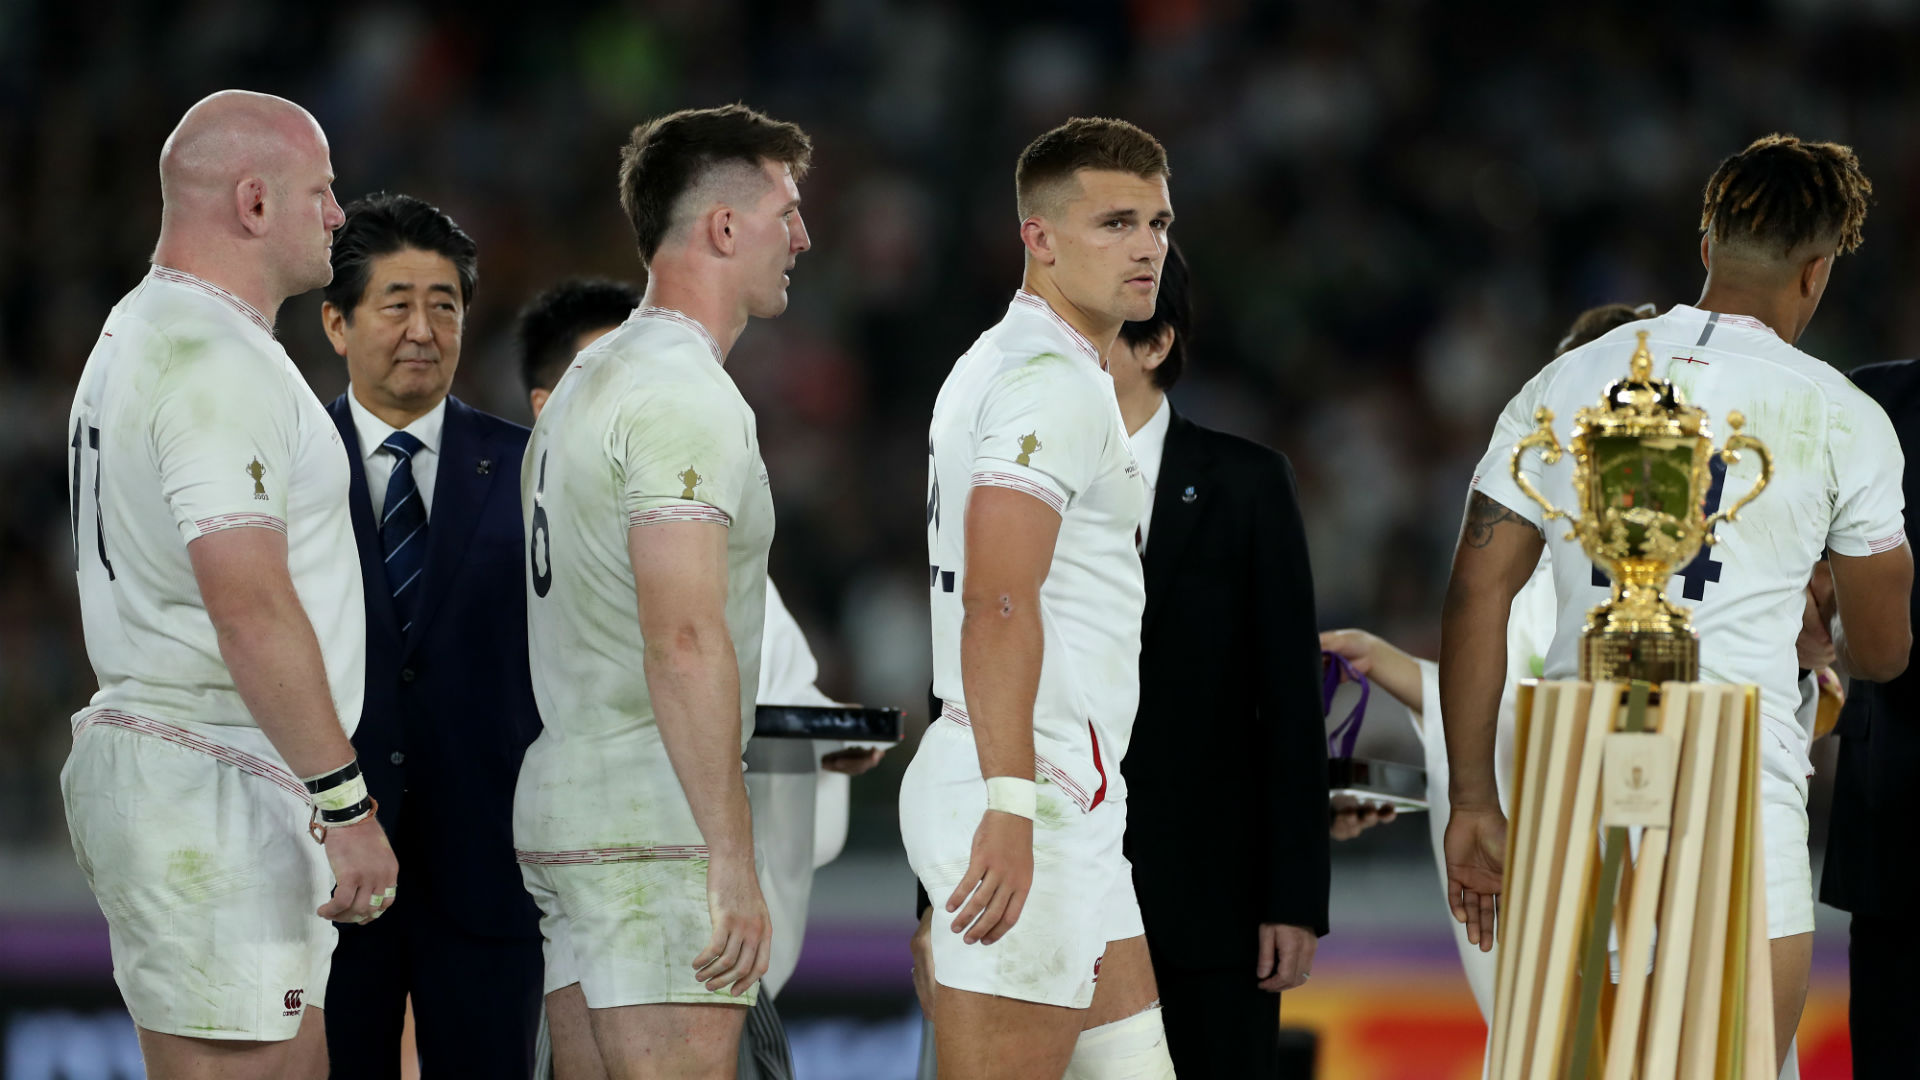 After their heavy defeat in the Rugby World Cup final, England have confirmed they will return to Japan for two Tests in 2020.